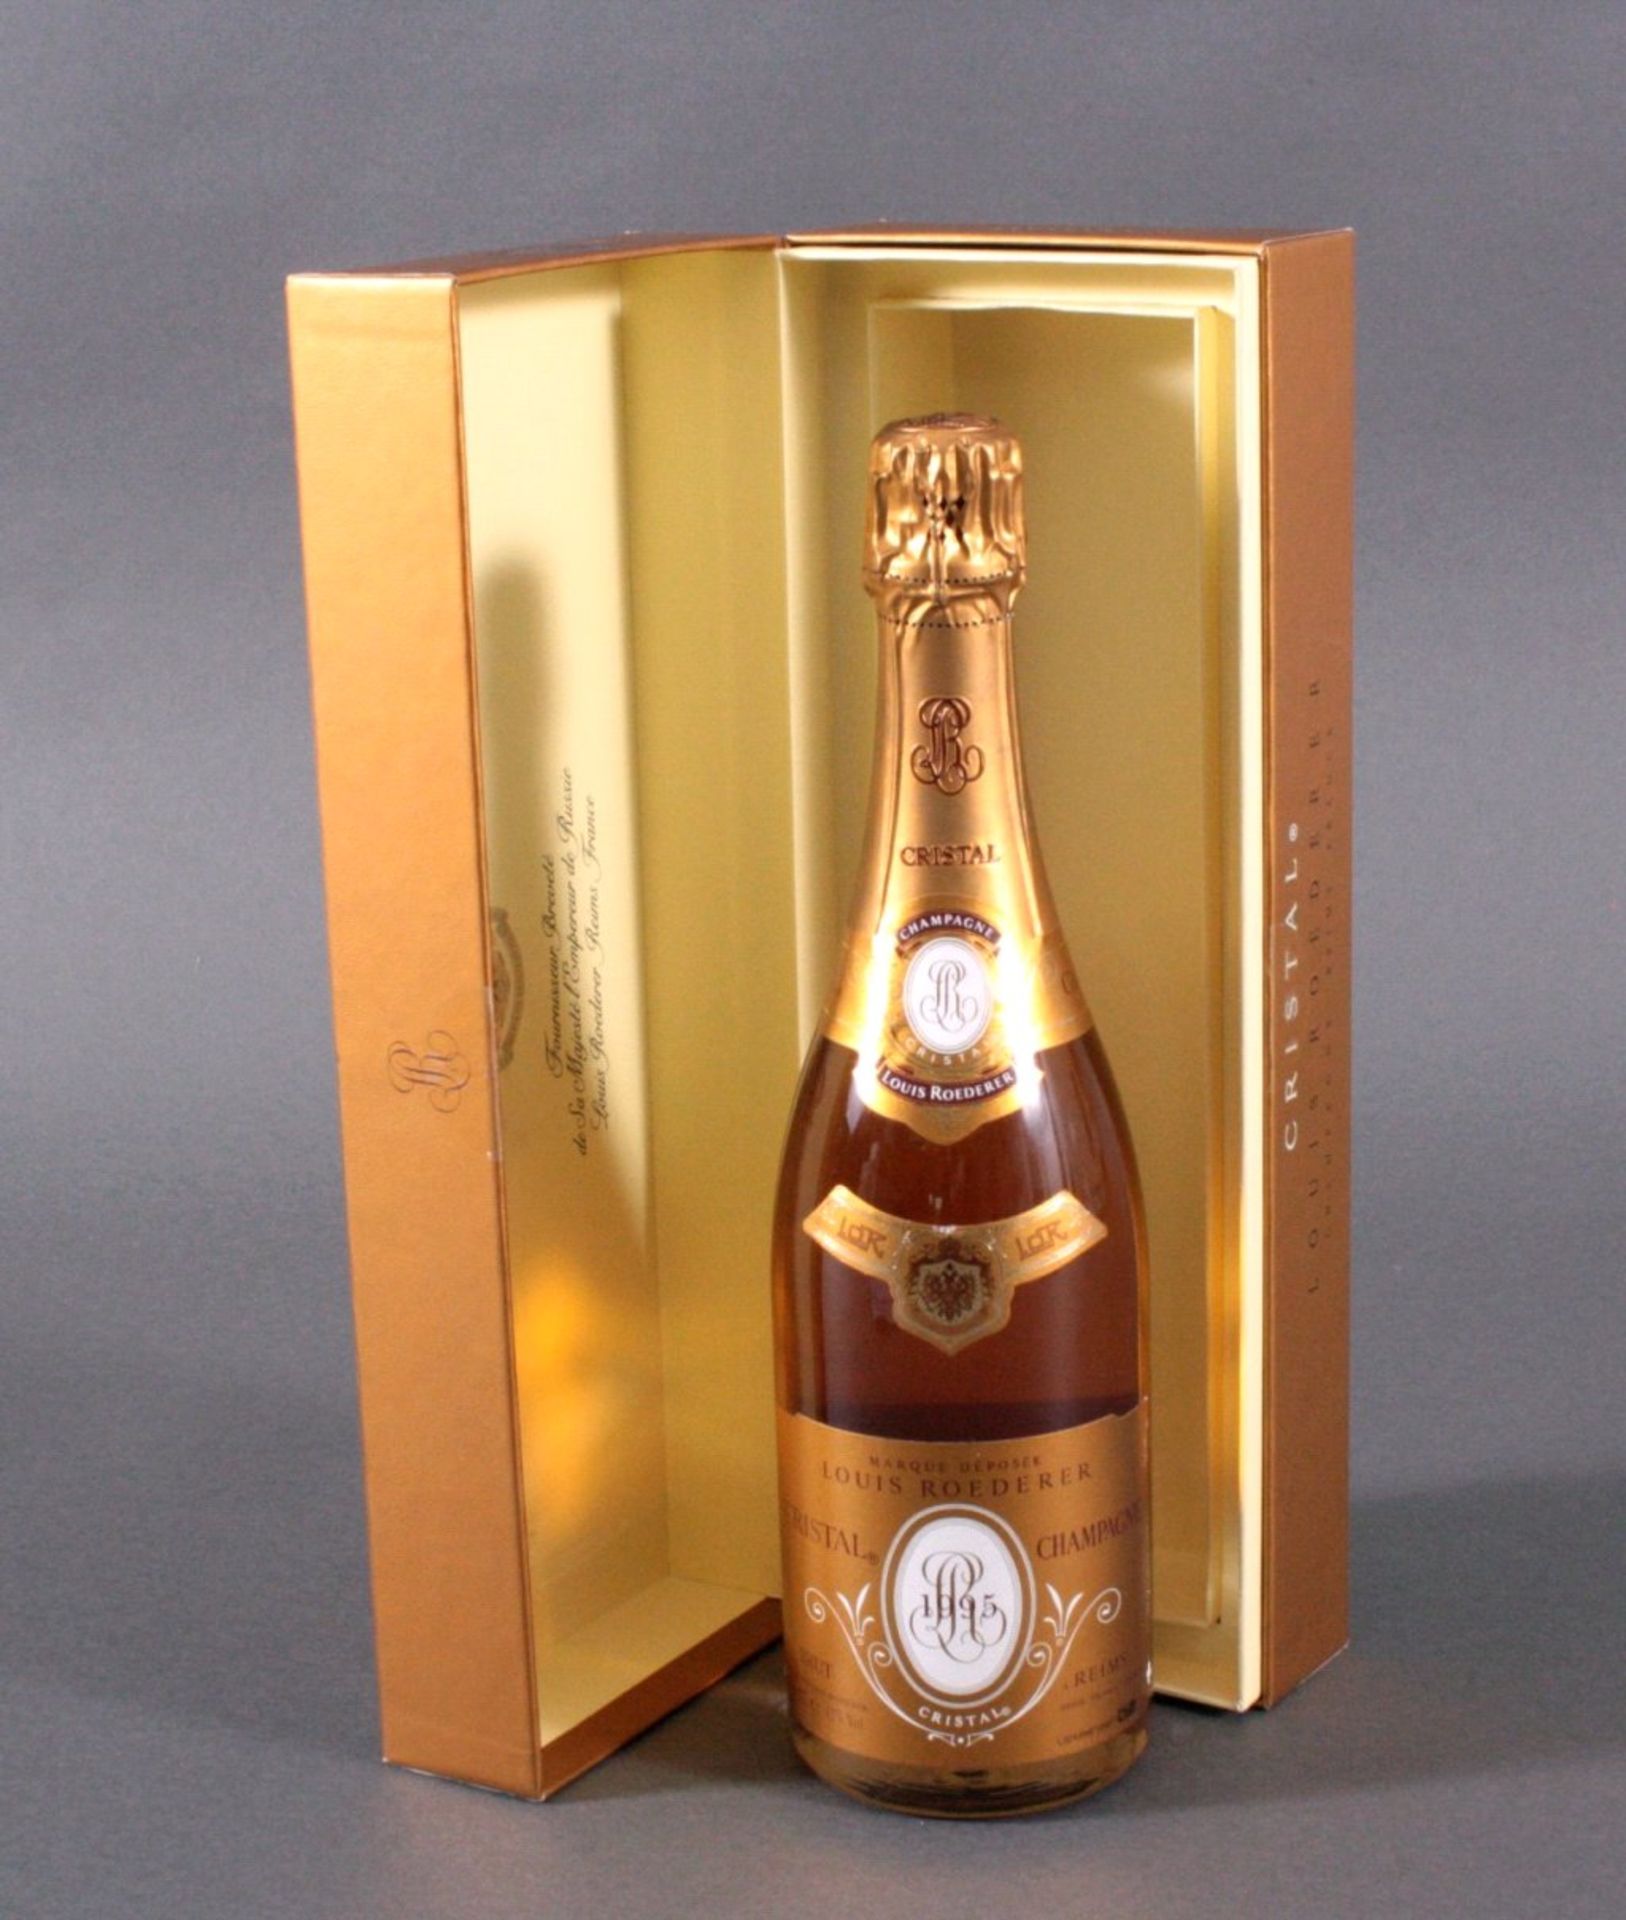 LOUIS ROEDERER CRISTAL Brut Champagner 1995In GeschenkboxCan not be send to the USA and Canada!